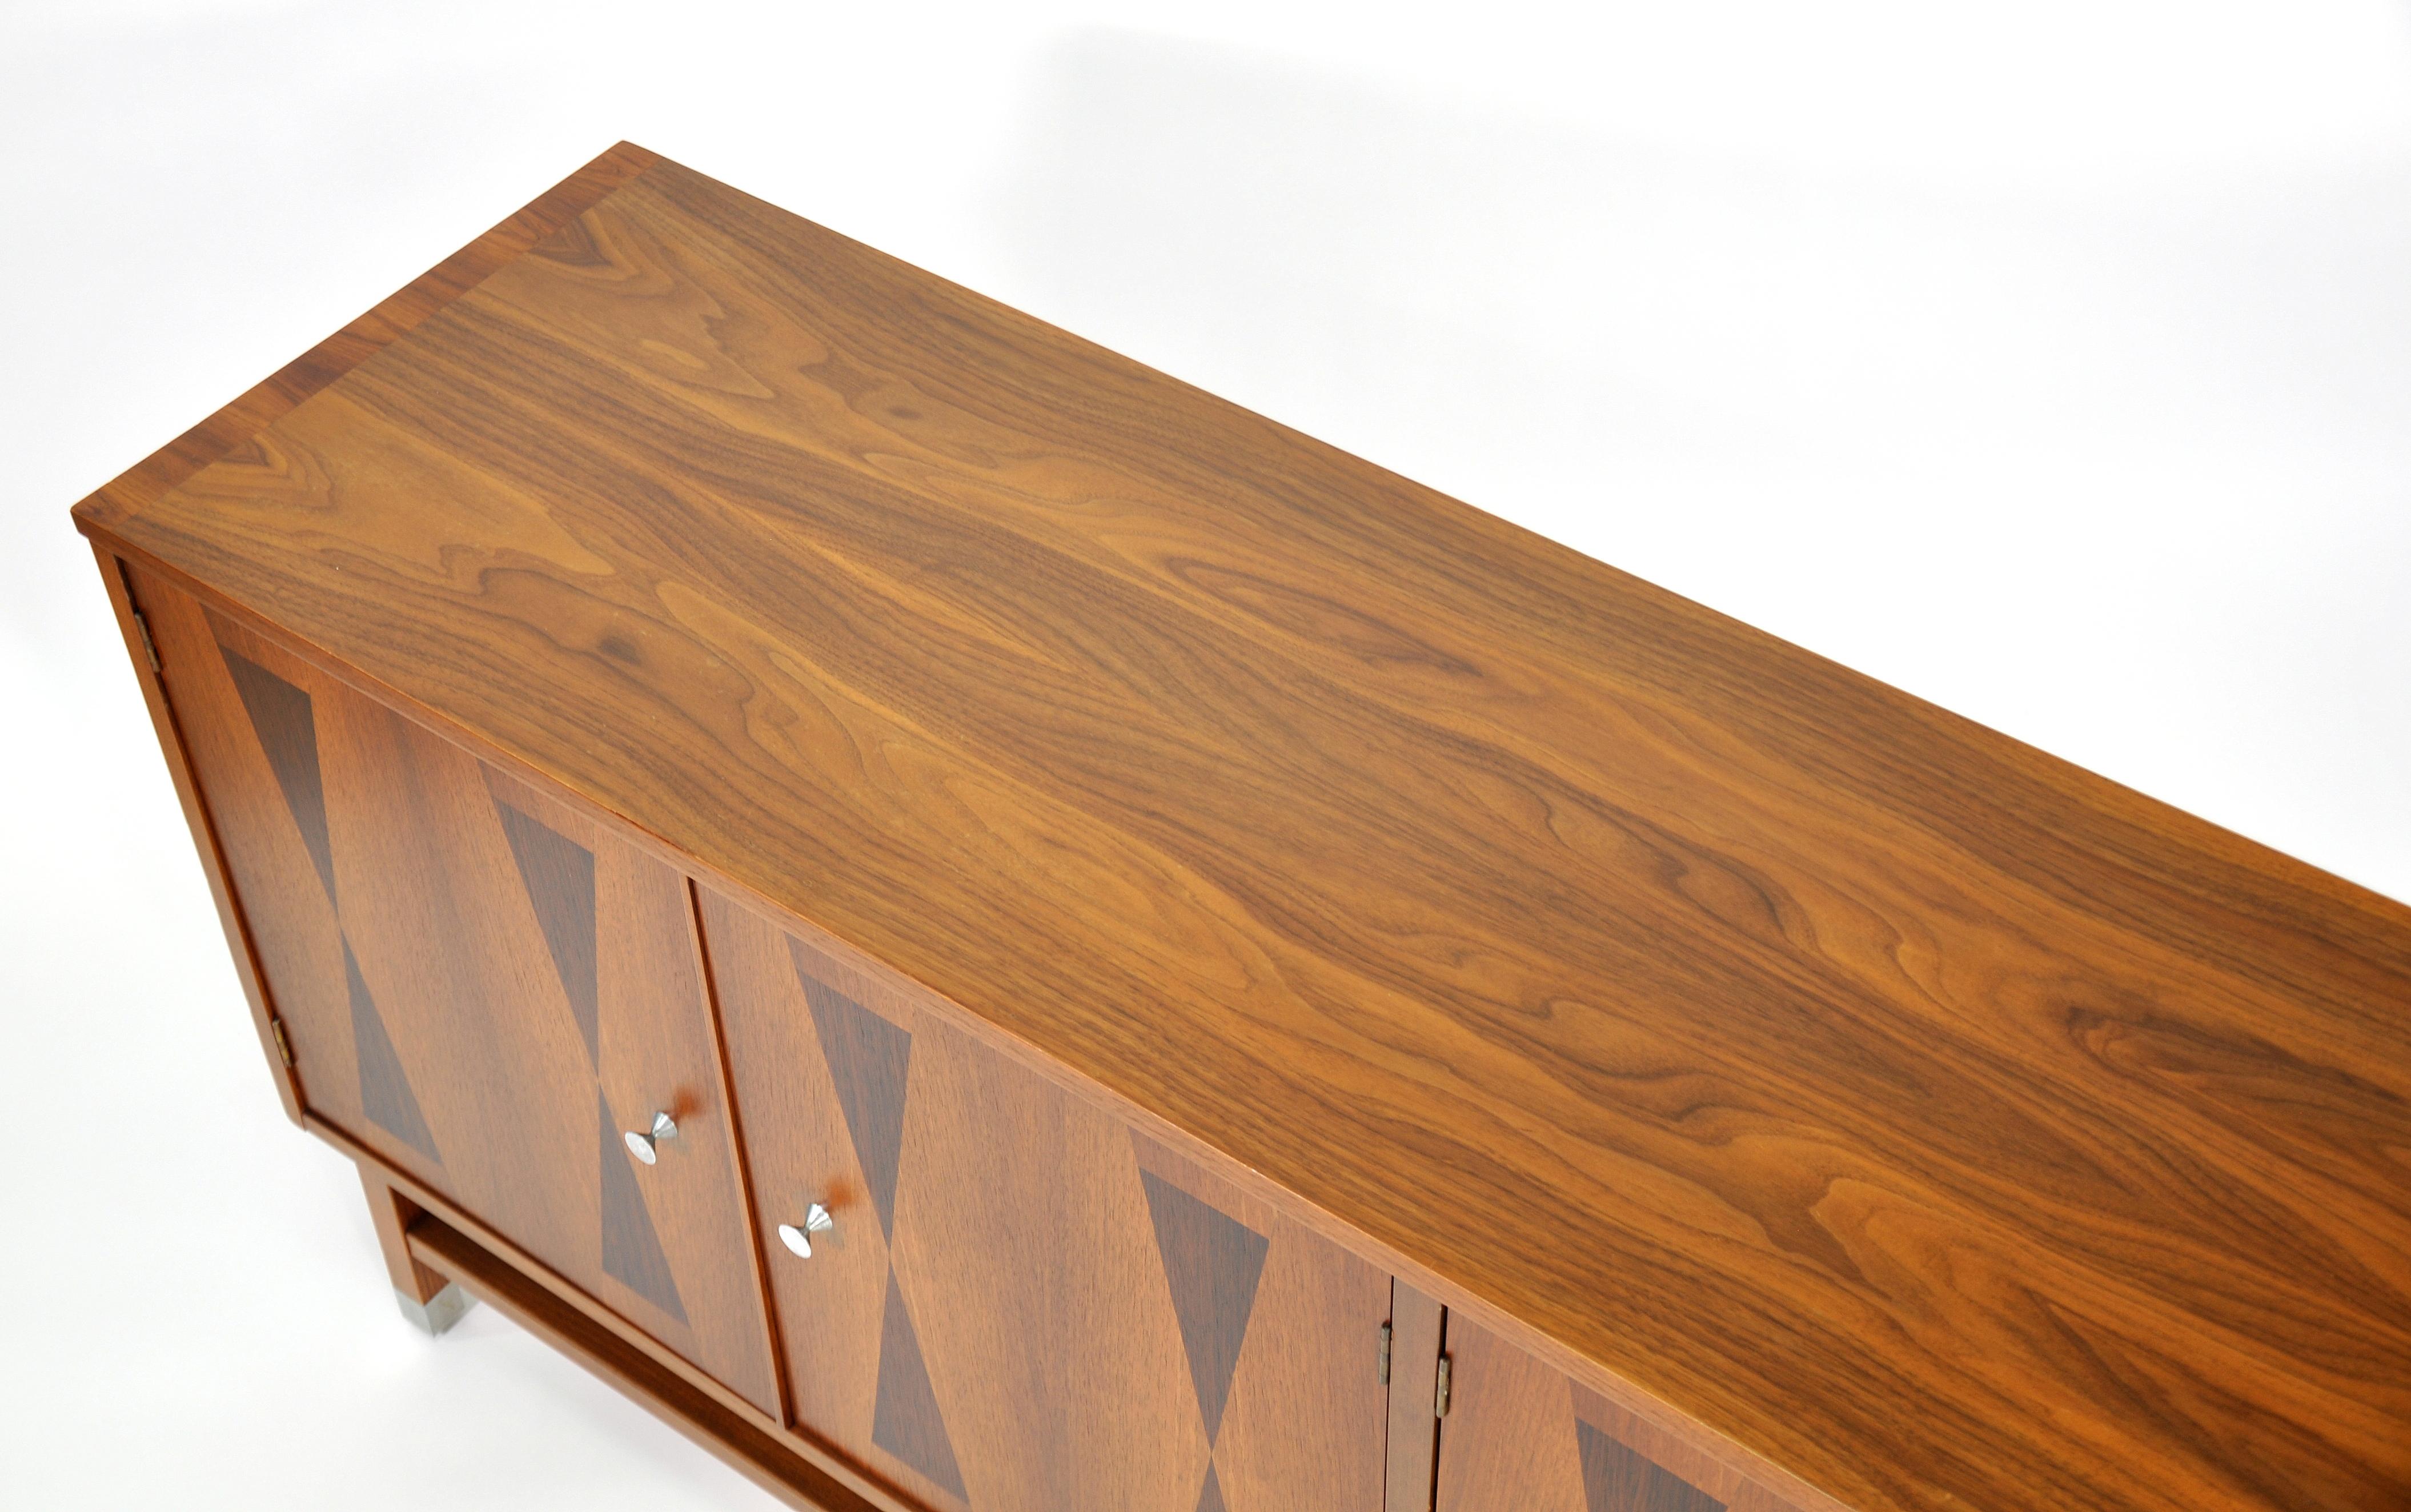 Aluminum Stanley Walnut and Rosewood Credenza